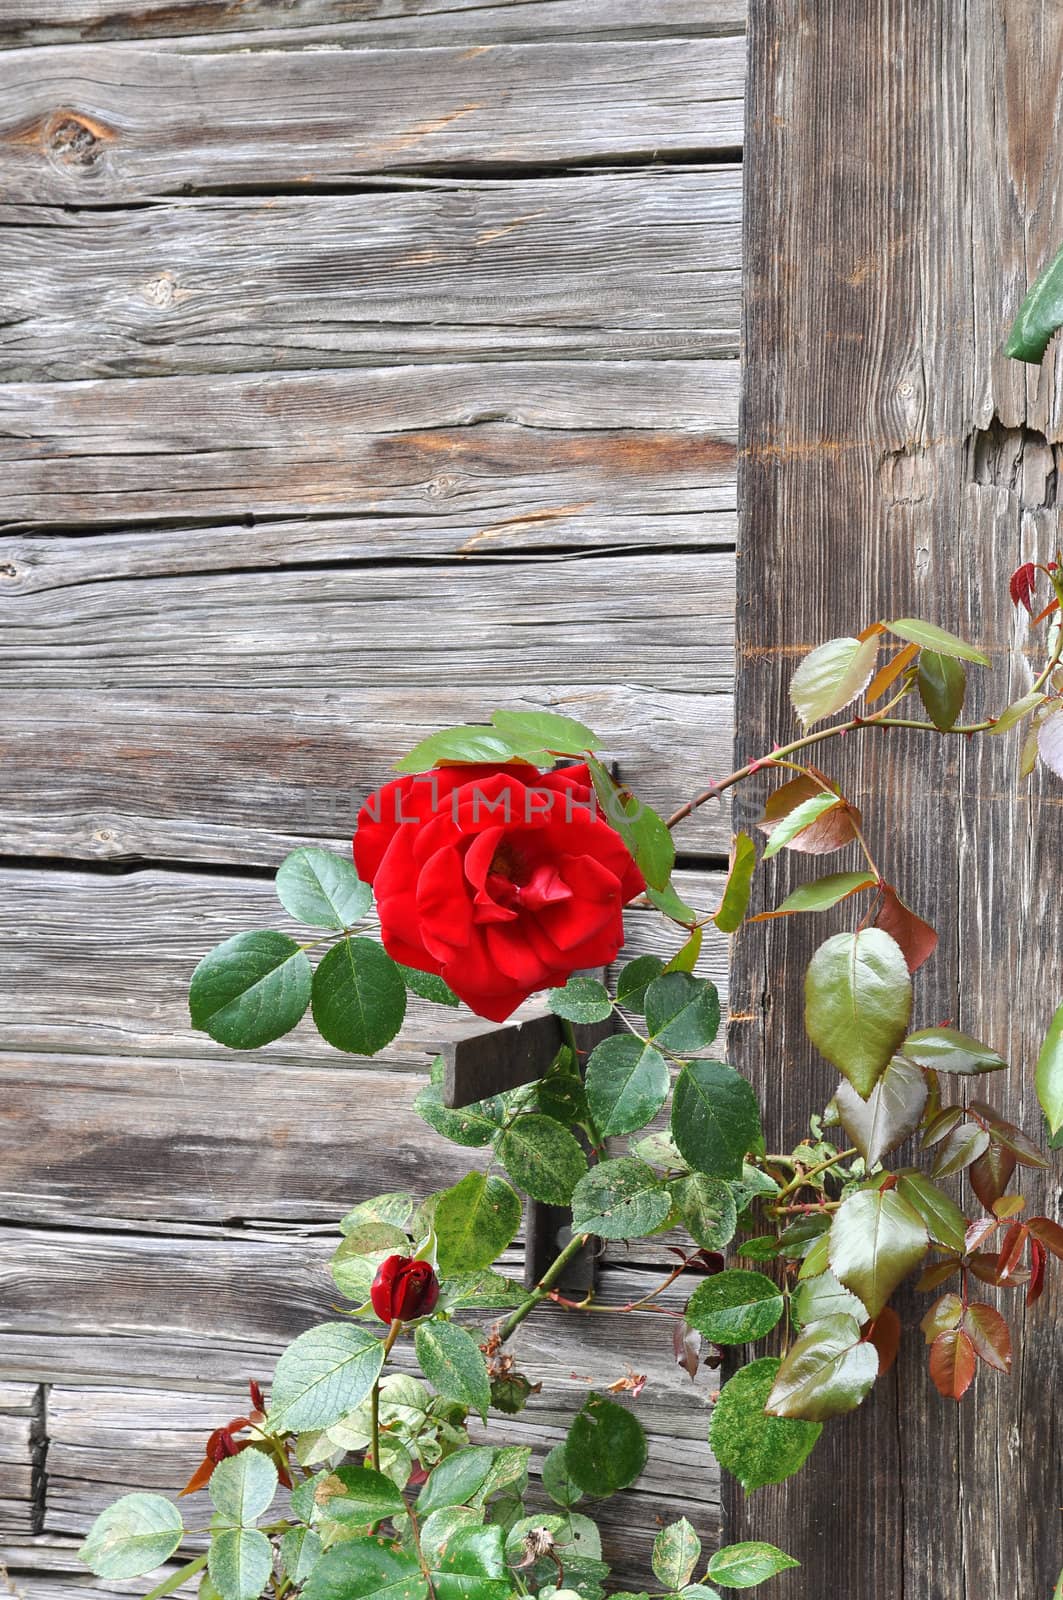 Red rose growing on ancient wooden wall.